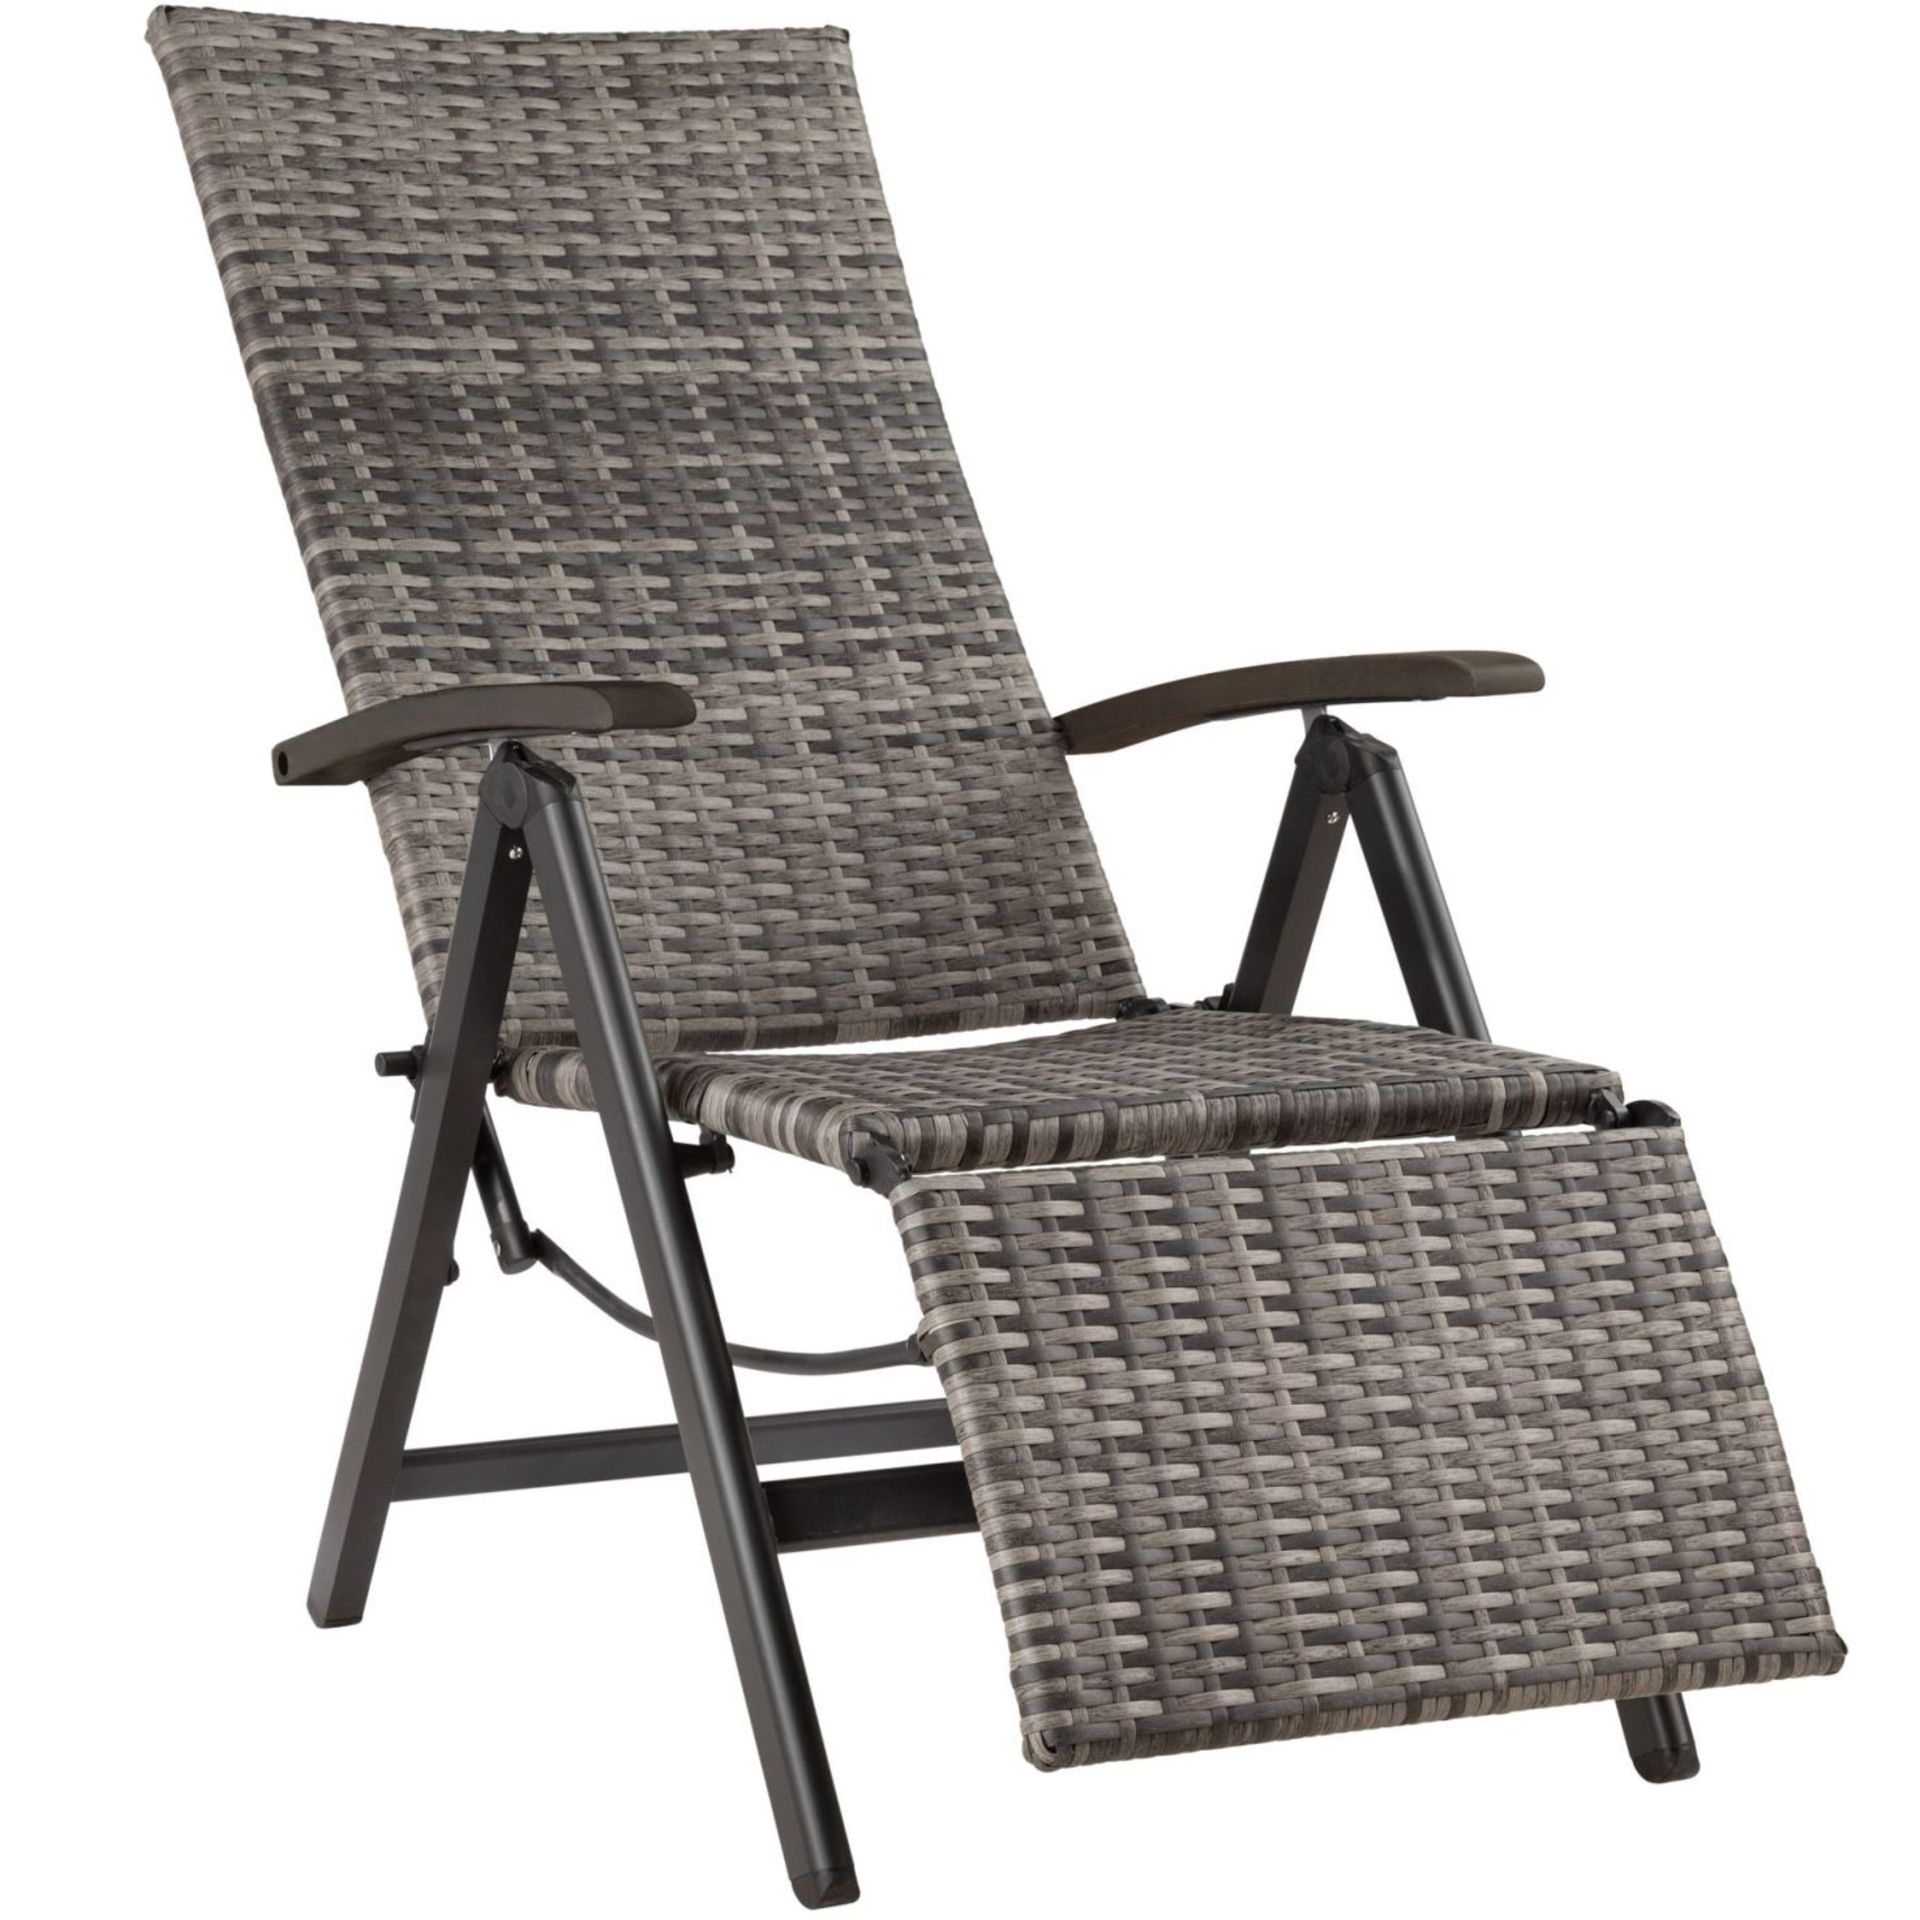 Tectake - Reclining Garden Chair With Footrest Grey - Boxed. RRP £113.99